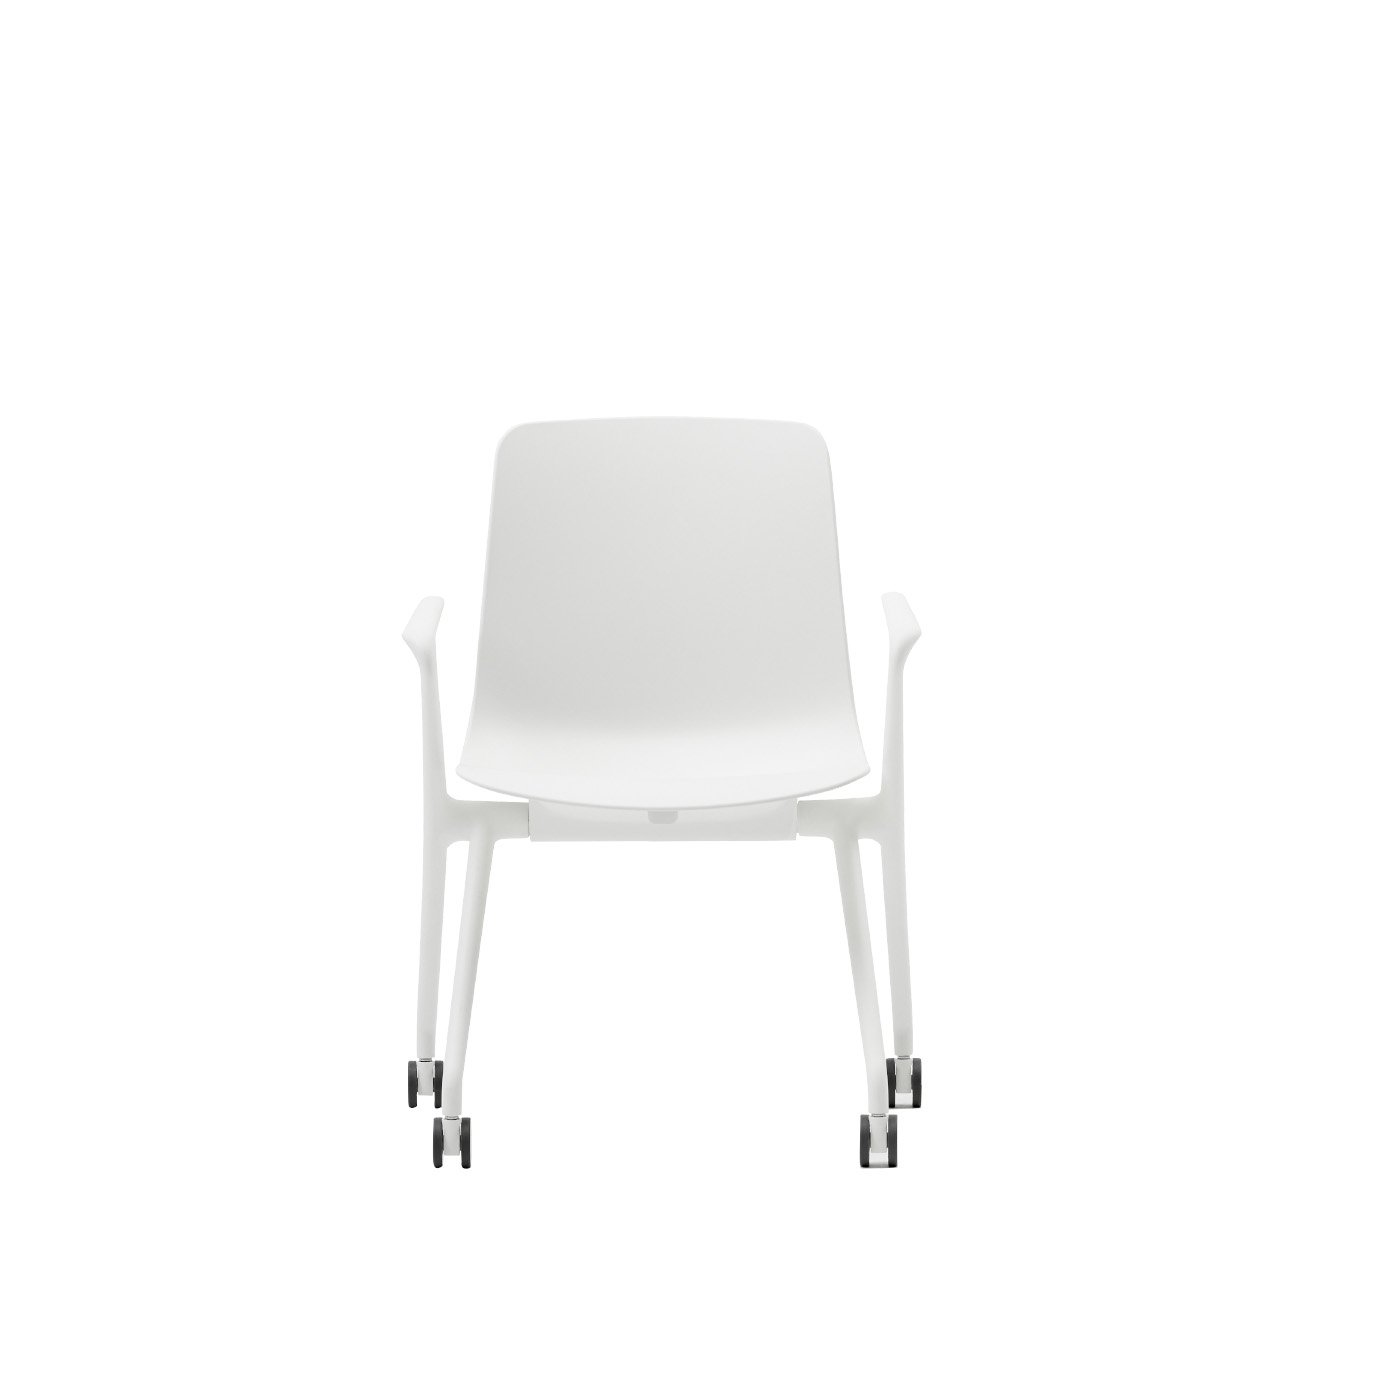 Haworth Bowi conference chair white front angle